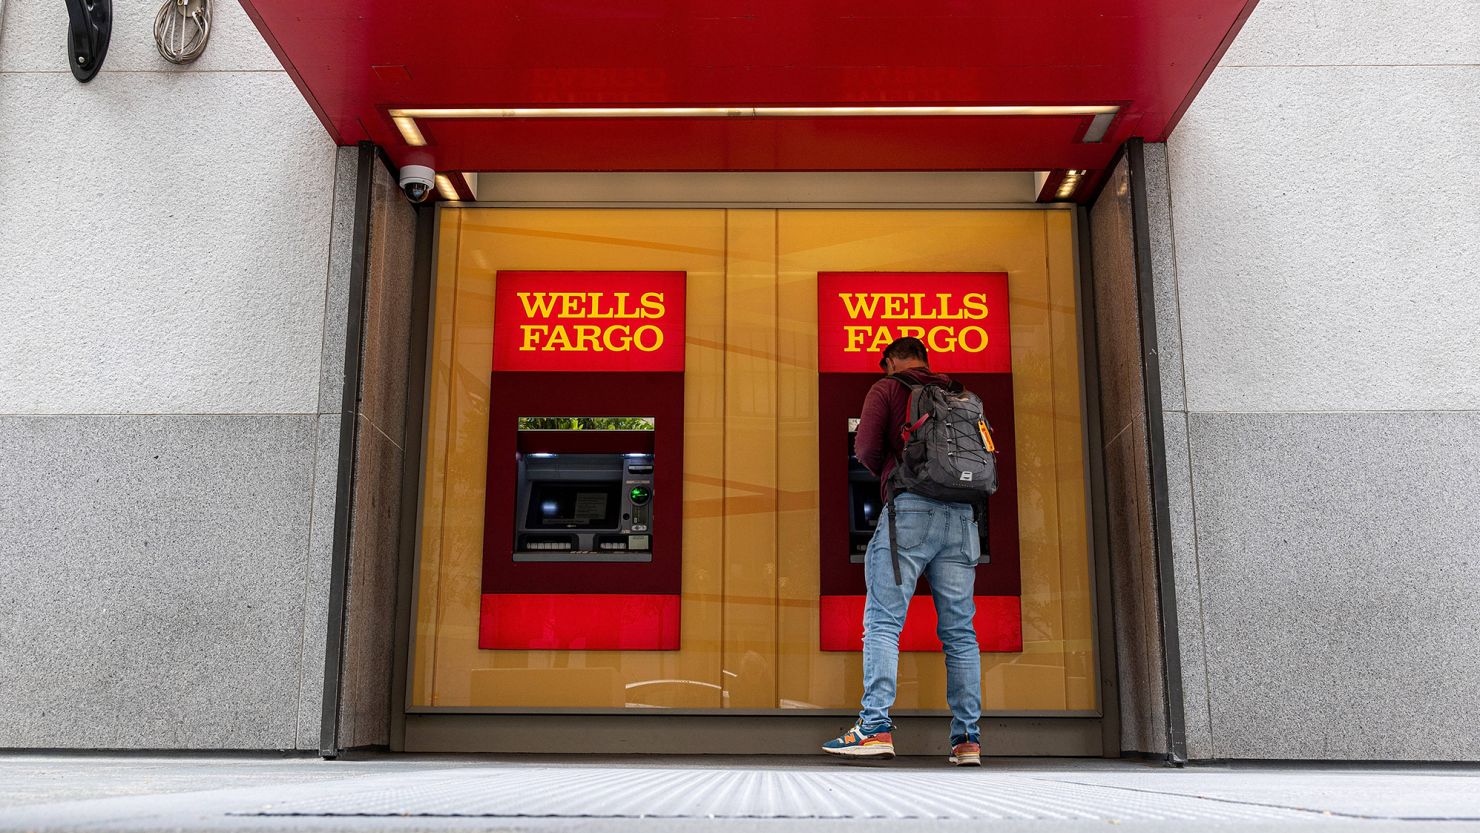 Wells Fargo will let some customers keep their lines of credit following outrage.